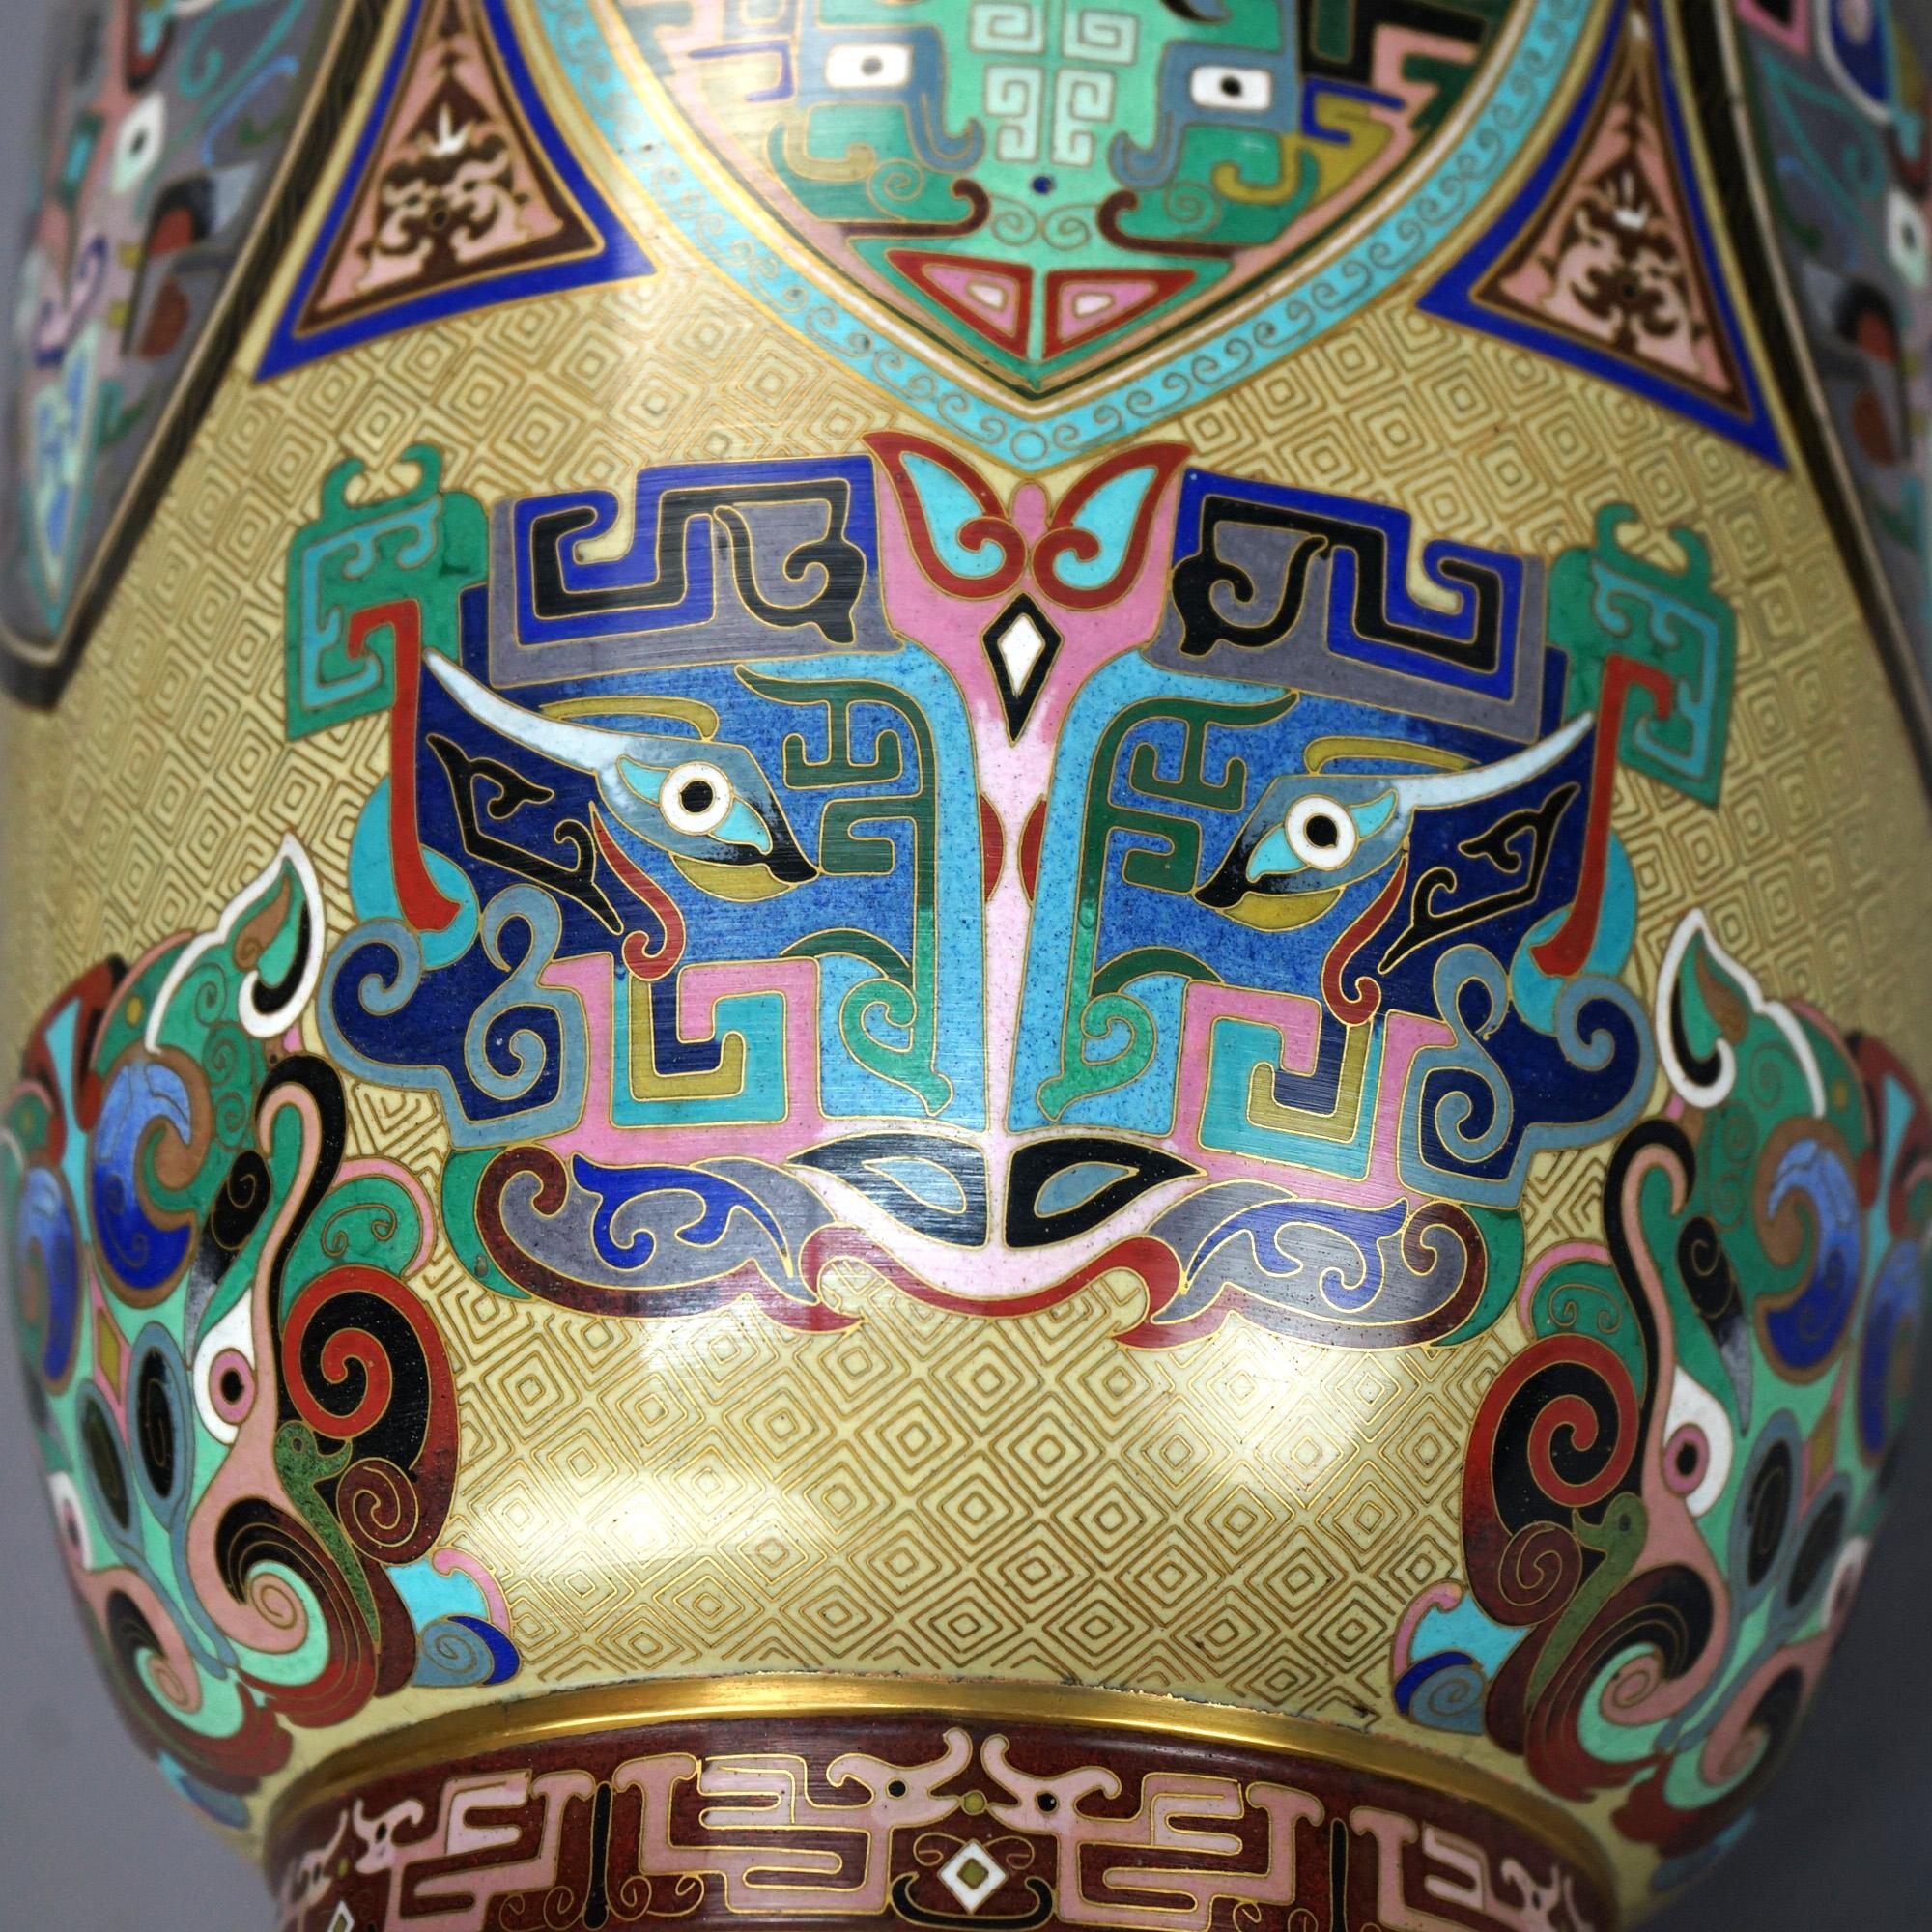 Monumental Pair of Chinese Cloisonne Vases with Stylized Foliage & Animals 20thc 2